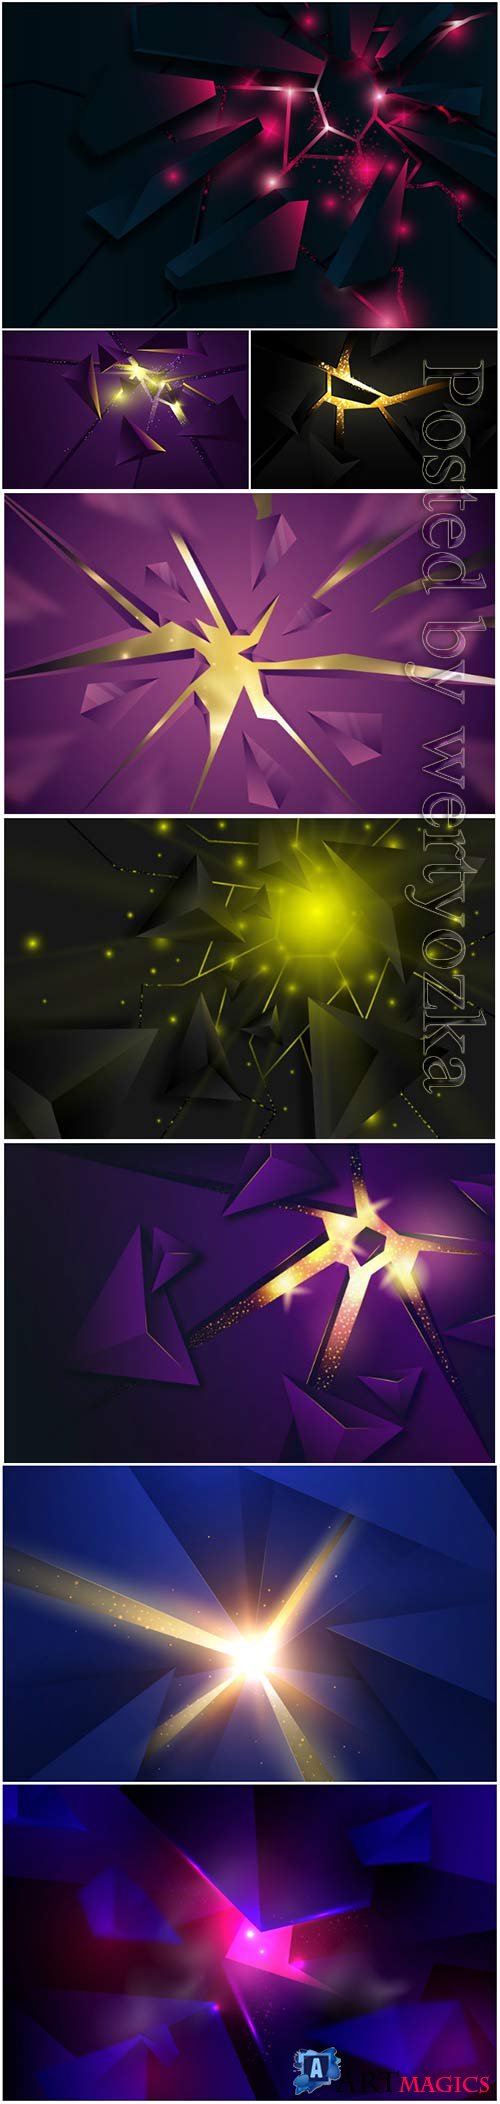 3d explosion with light vector background